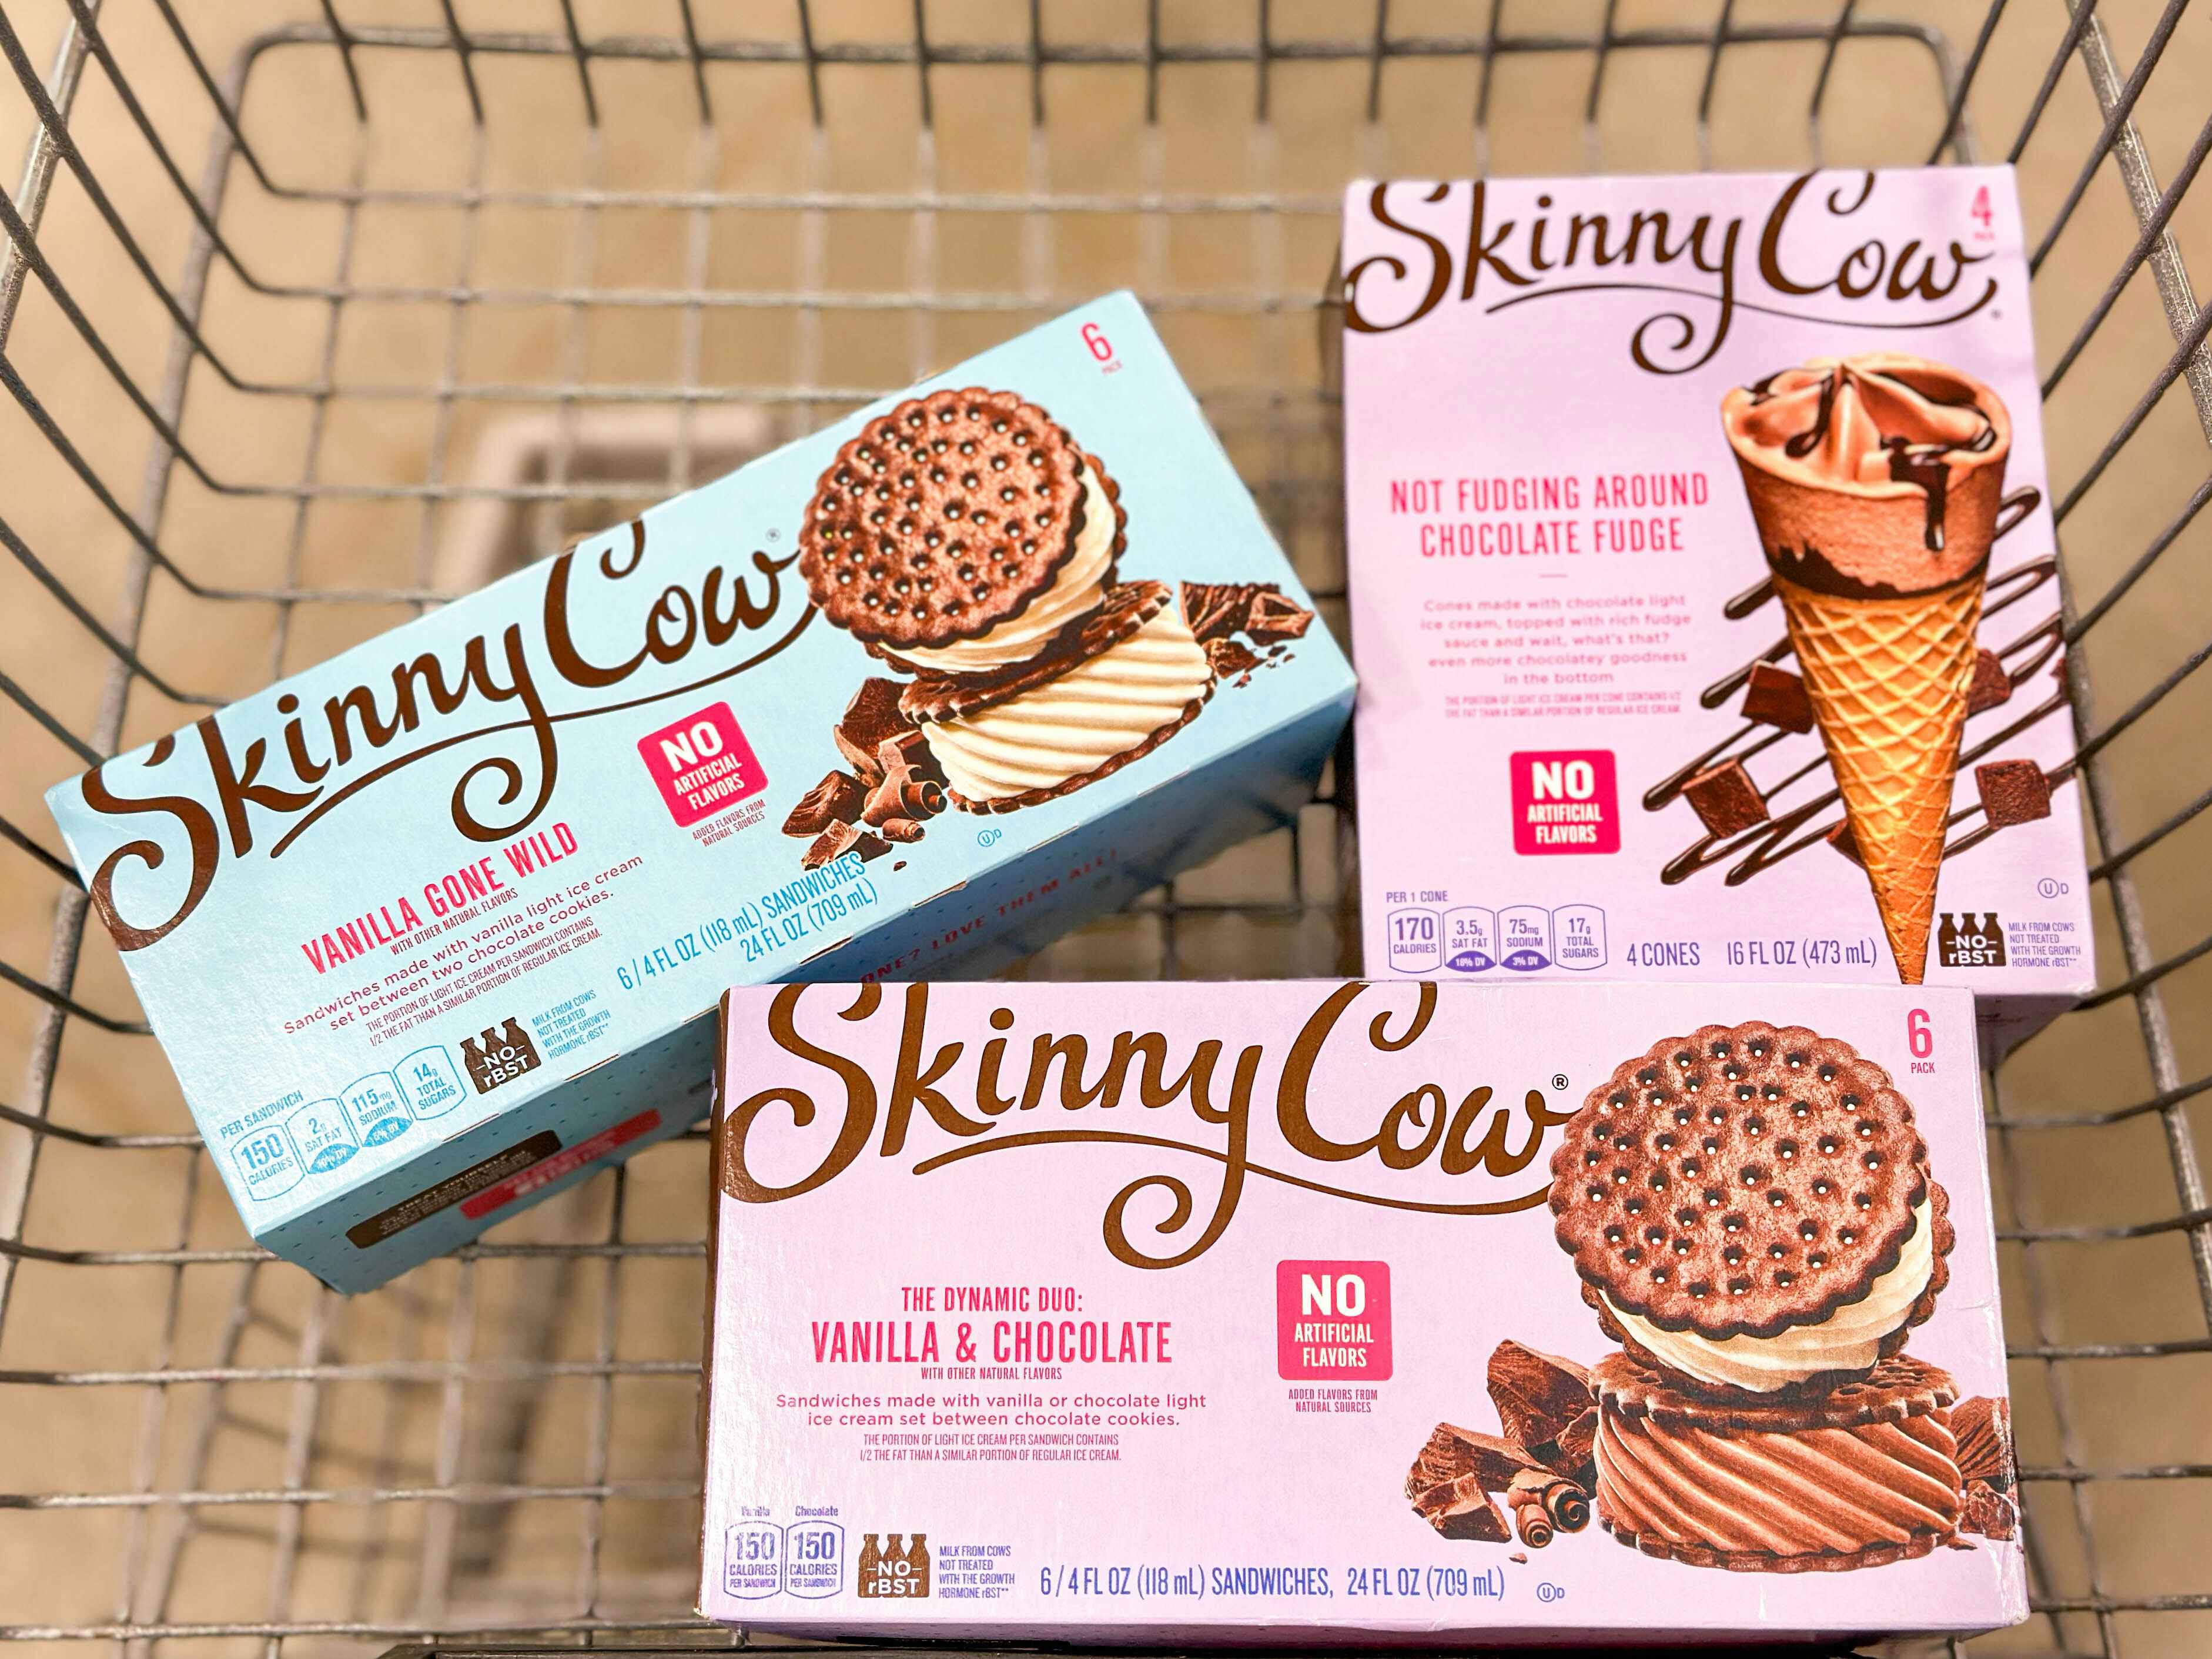 Easy $0.75 Savings on Skinny Cow Ice Cream Sandwiches at Kroger and Walmart